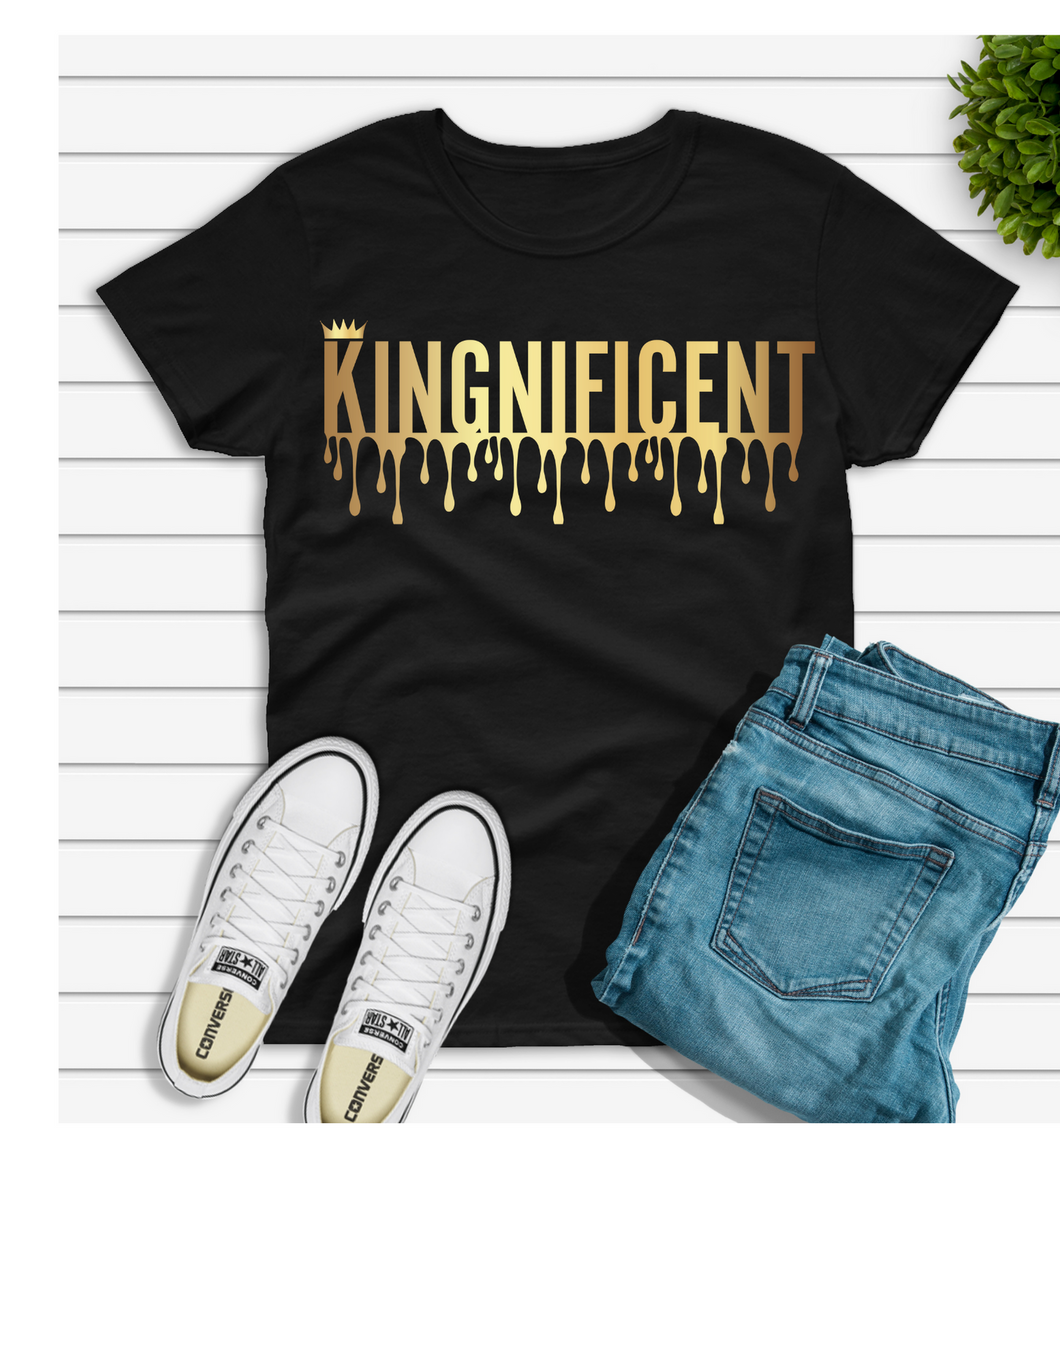 Kingnificent/Auntie Lolo's Creations